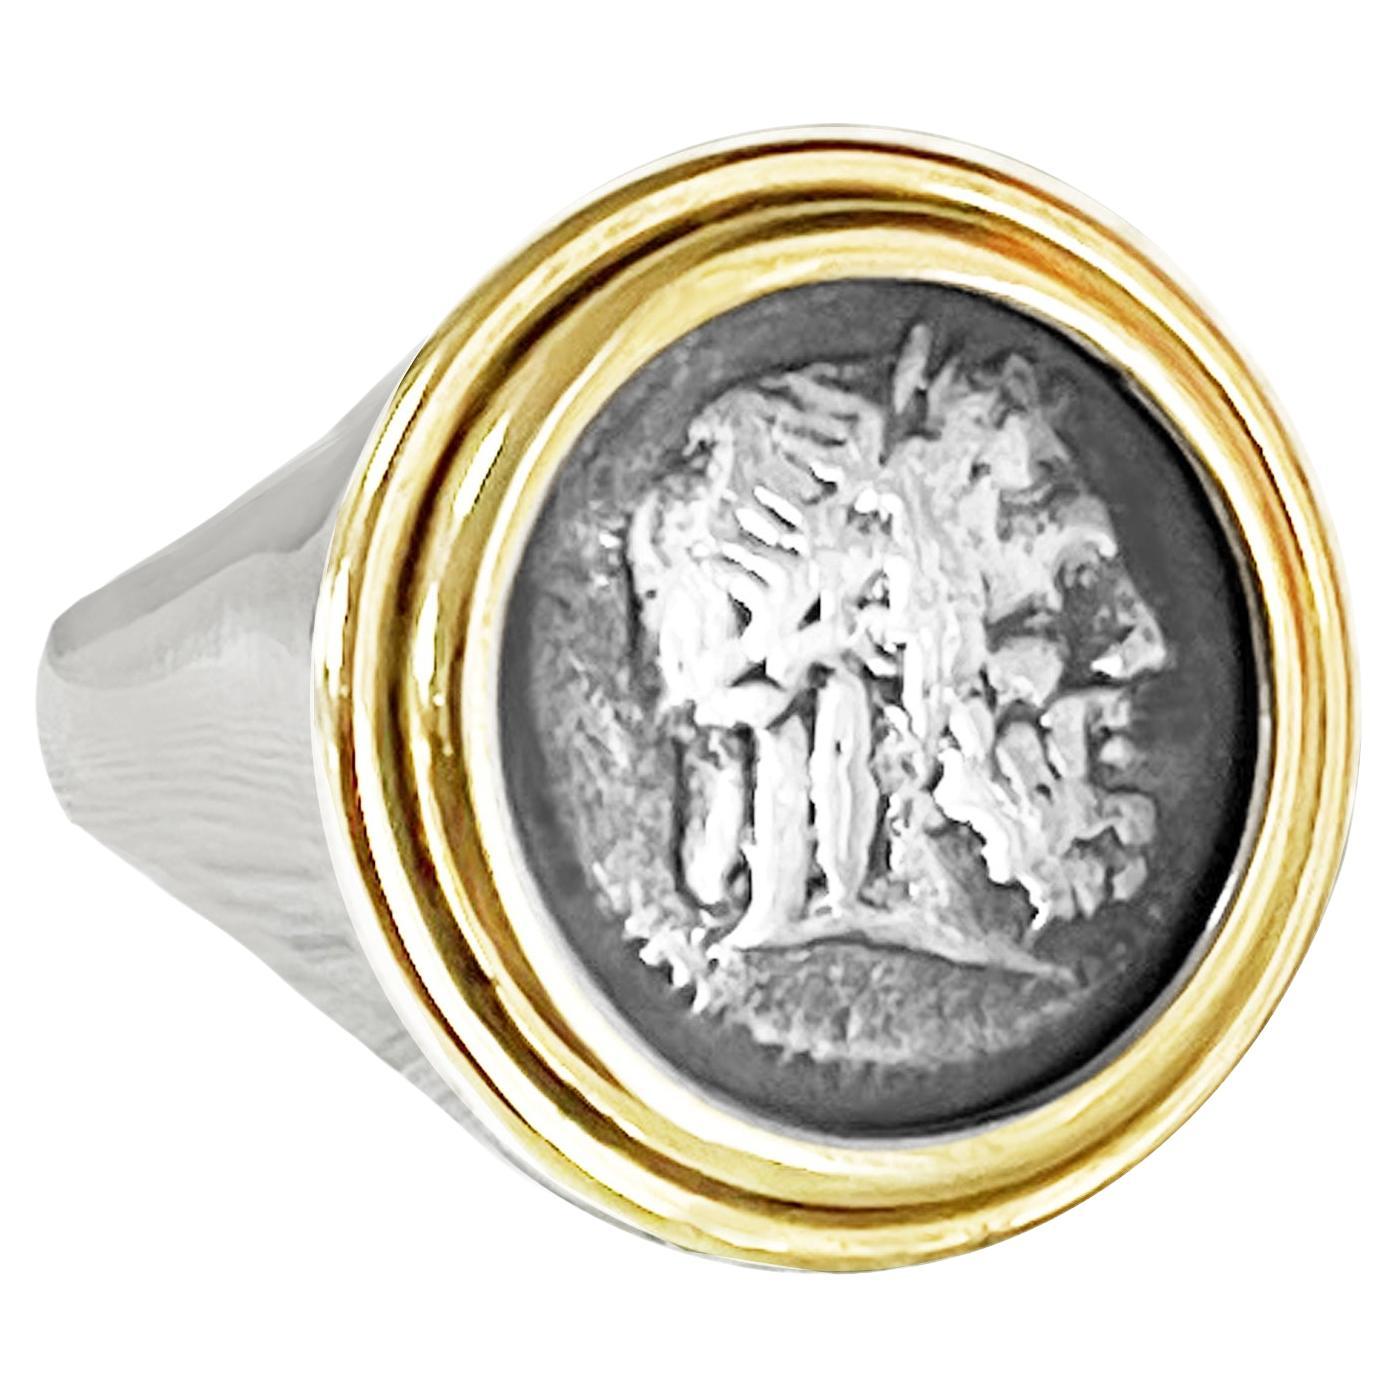 Authentic Zeus Roman Coin '3rd century BC' Sterling Silver and 18 Kr Gold Ring